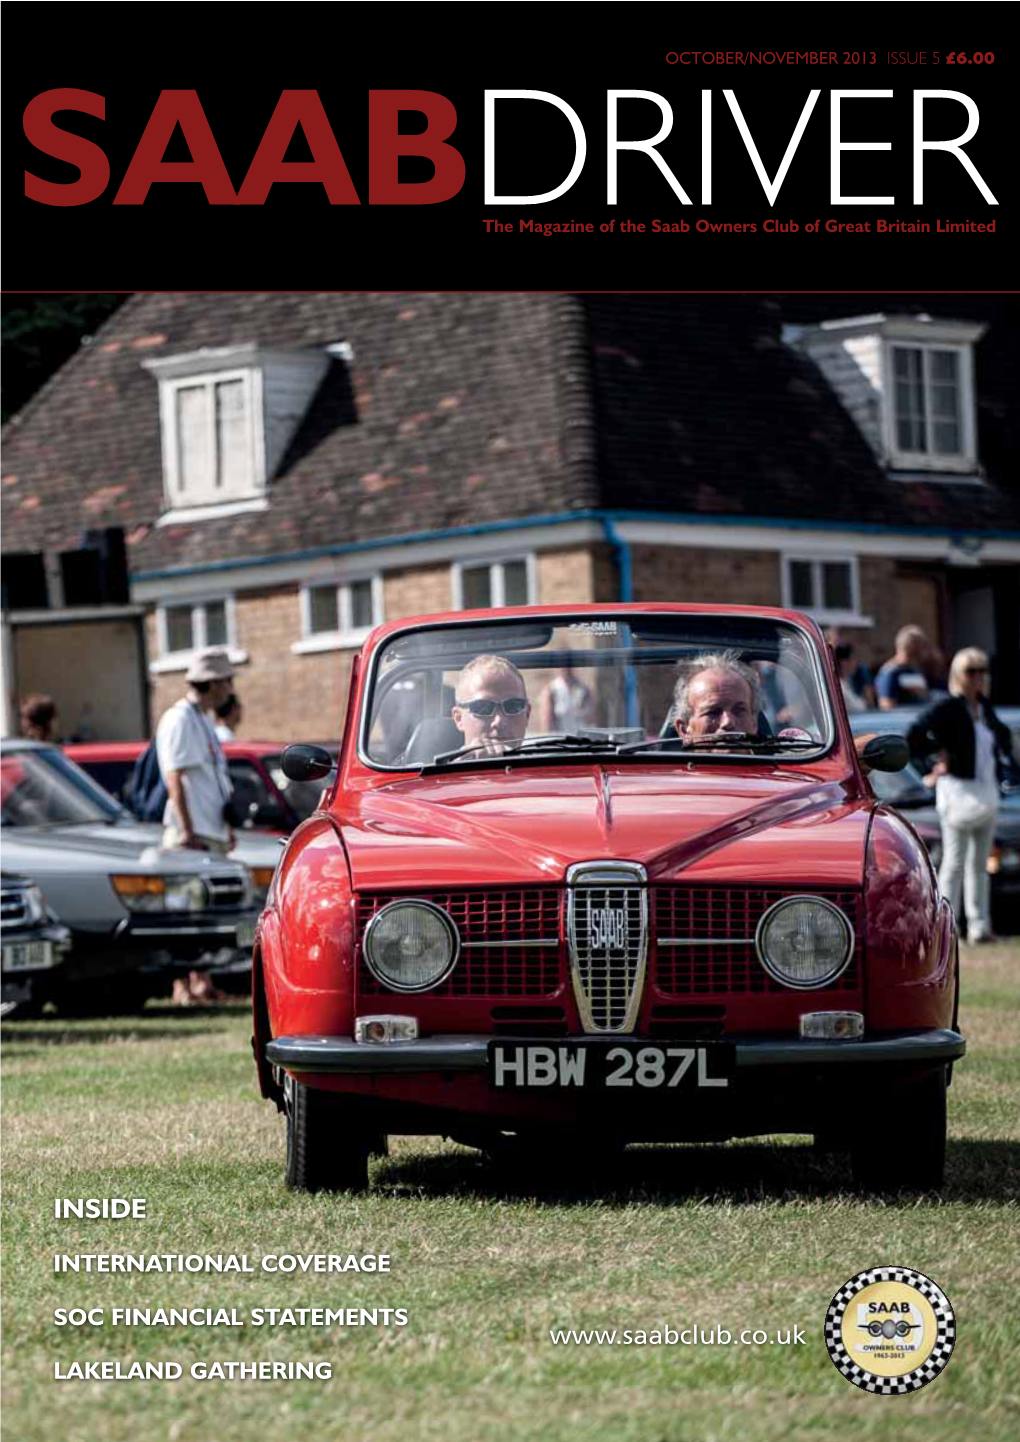 Saabdriverthe Magazine of the Saab Owners Club of Great Britain Limited